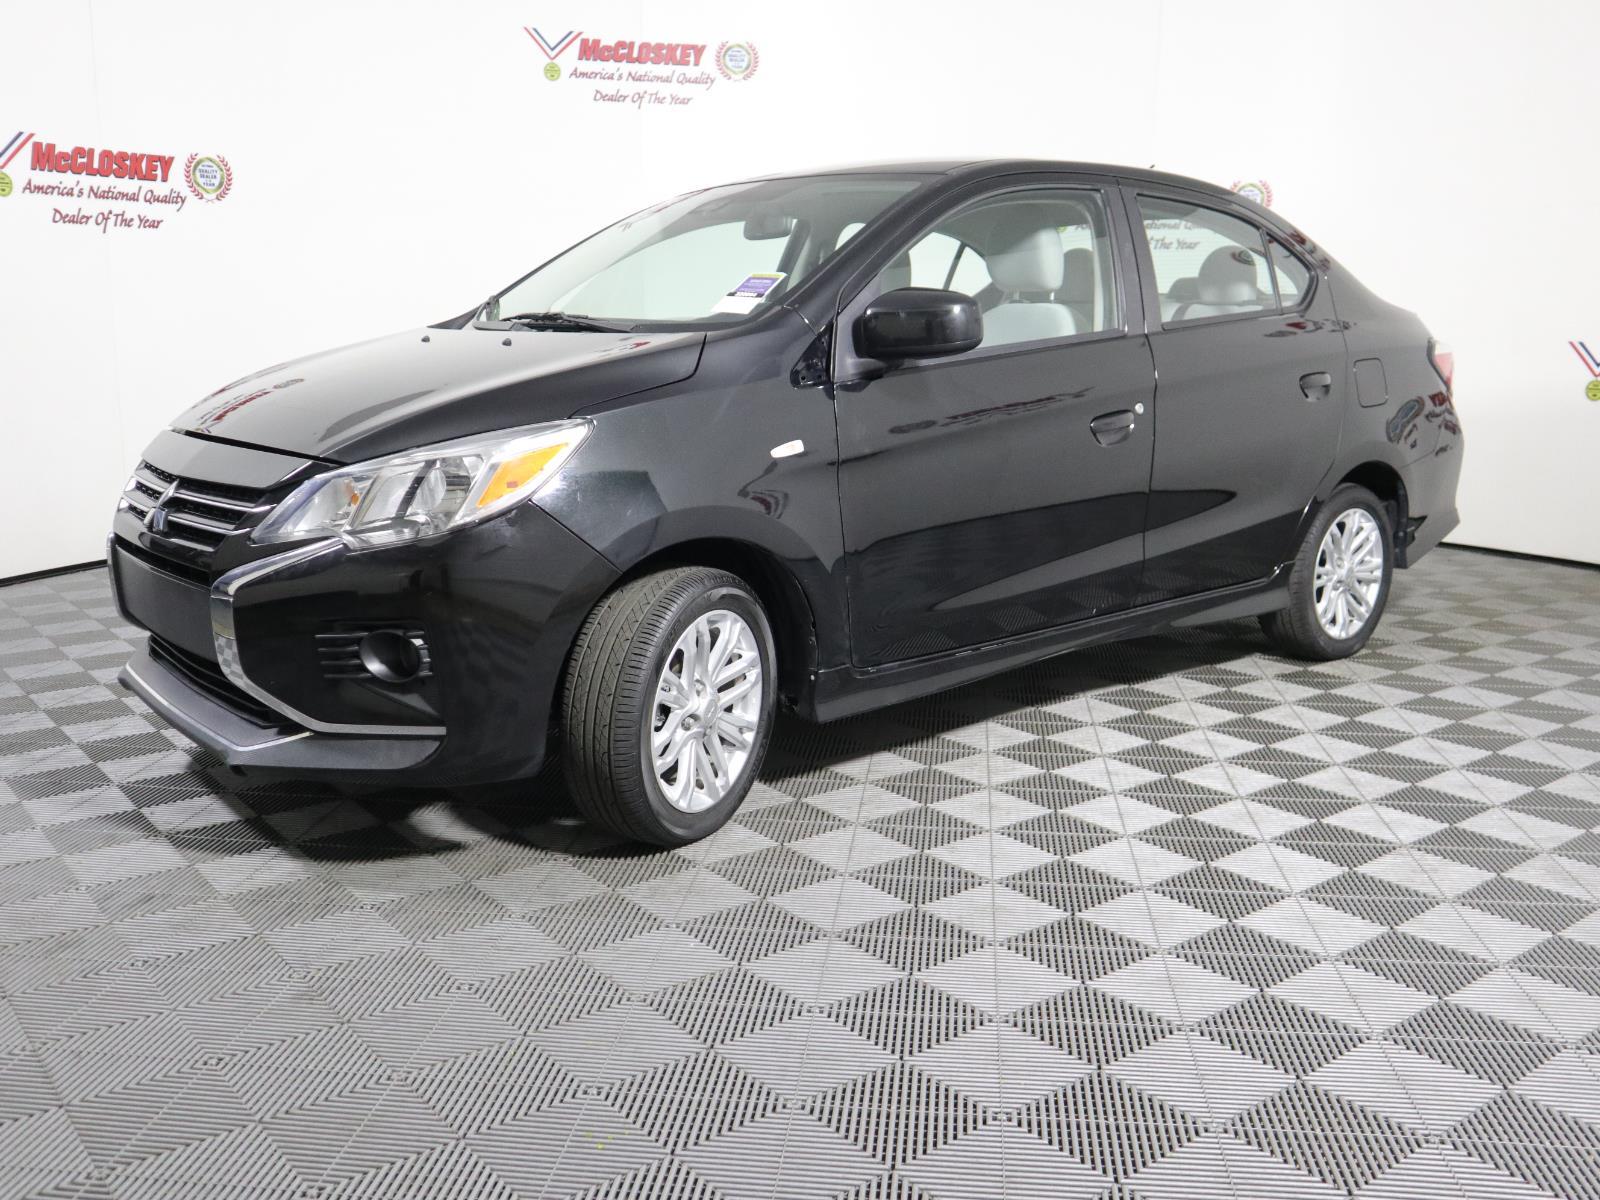 Preowned 2021 Mitsubishi Mirage G4 ES CARBONITE EDITION! NEW TIRES! 37 MPG! NEW SHOCKS/STRUTS! FORWARD COLLISION MITIGATION! for sale by McCloskey Imports & 4X4's in Colorado Springs, CO